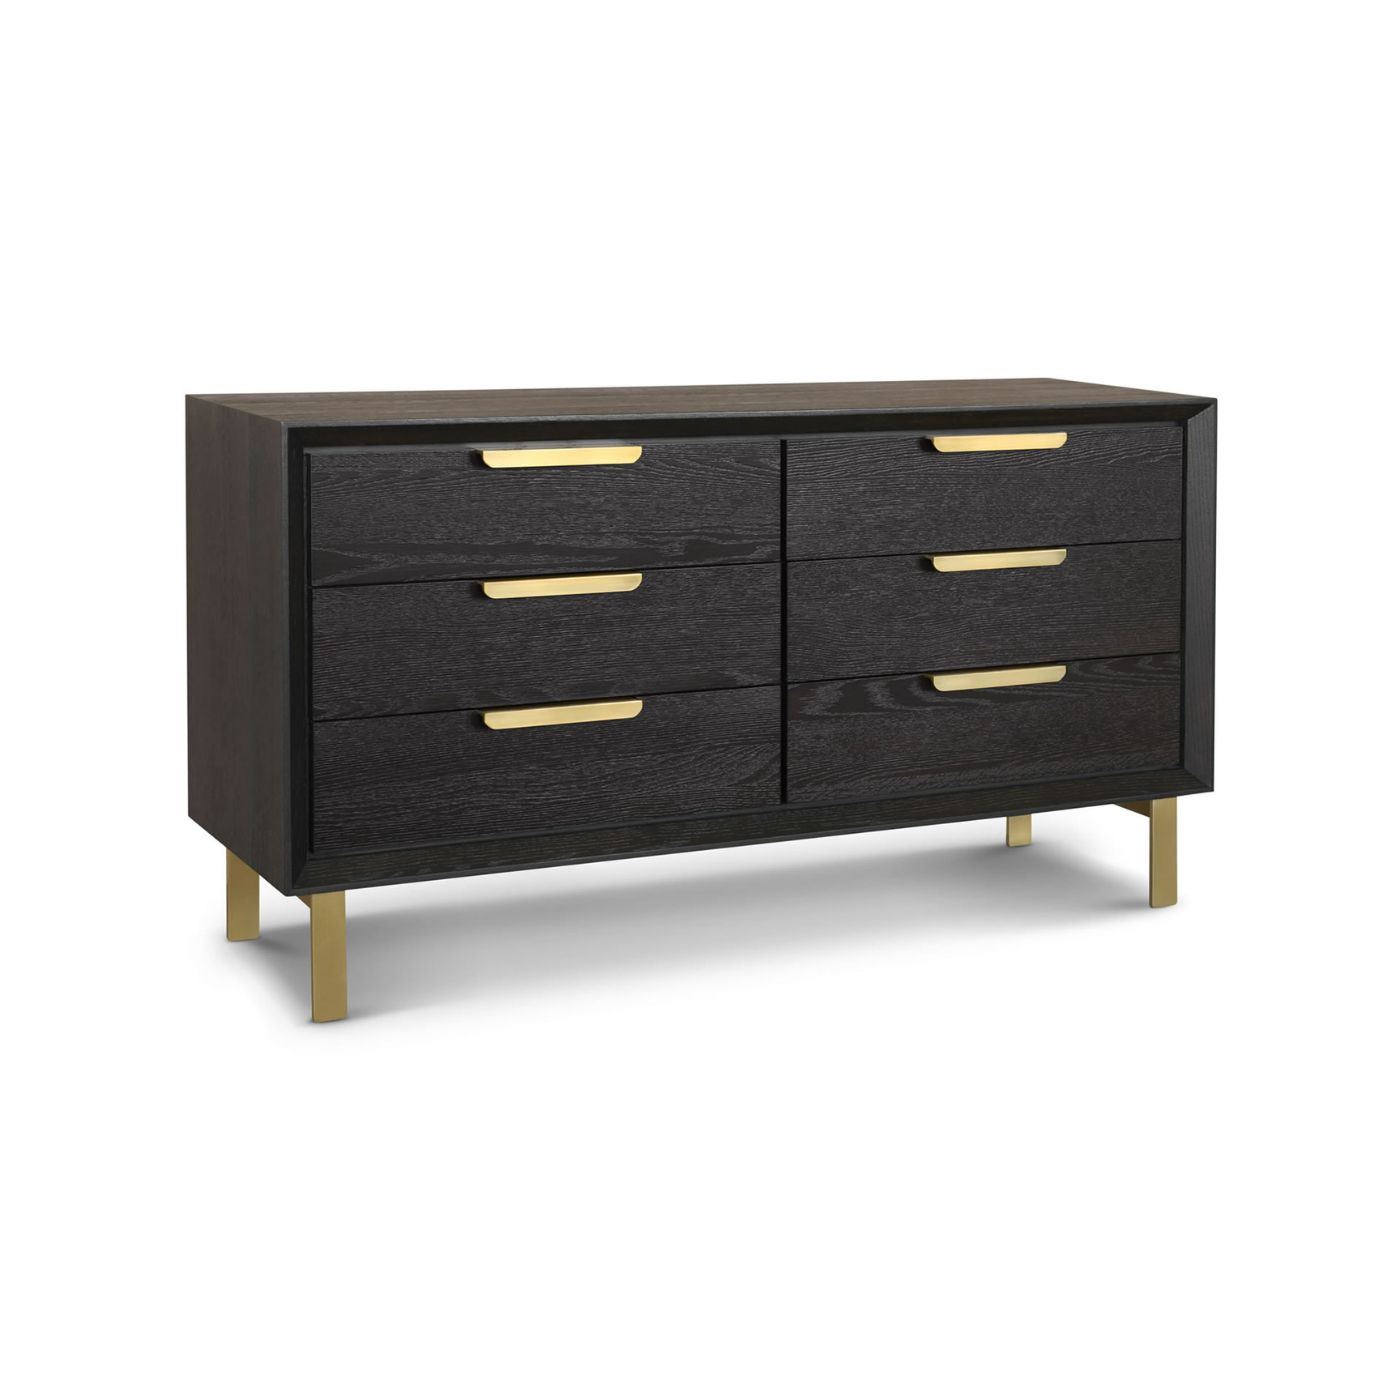 Aspen Dark Wooden 6-Drawer Chest of Drawers with Gold Handles by Berkeley Designs - Maison Rêves UK